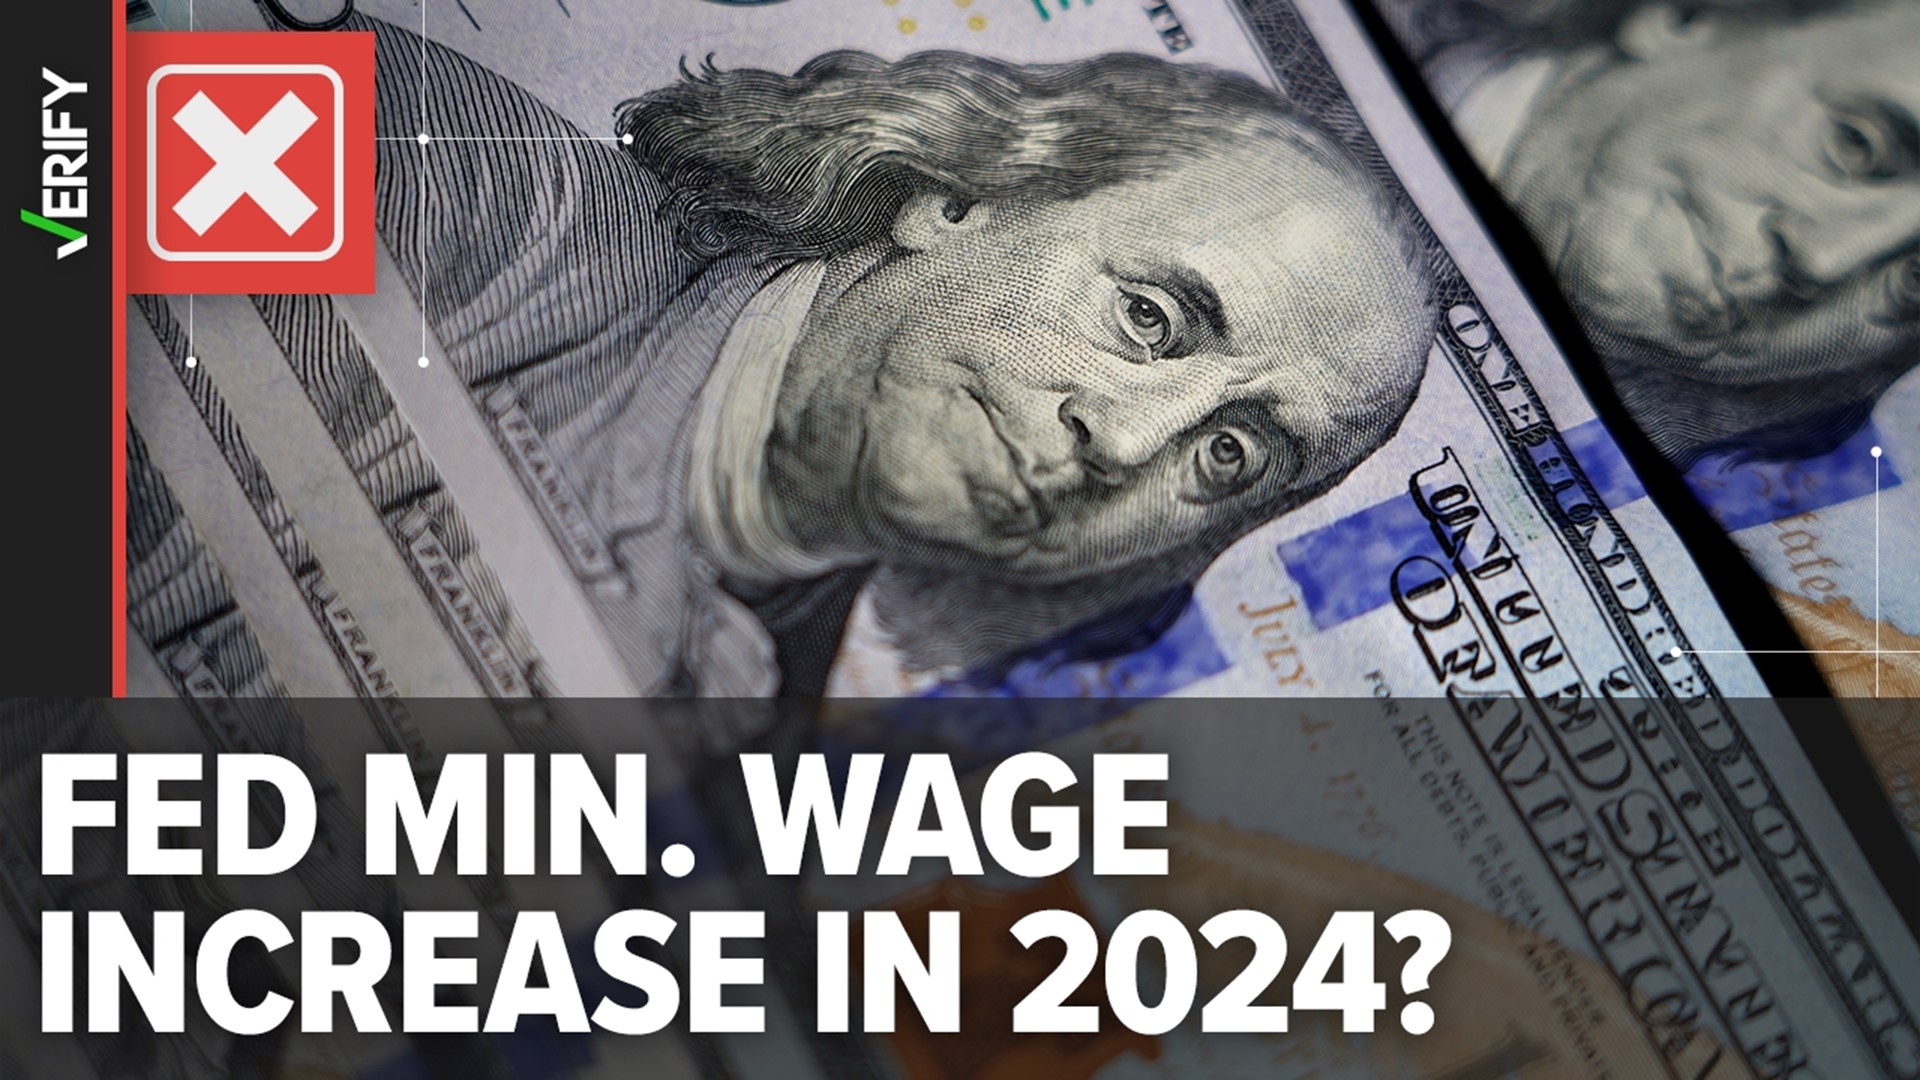 Federal minimum wage isn’t going up in 2024